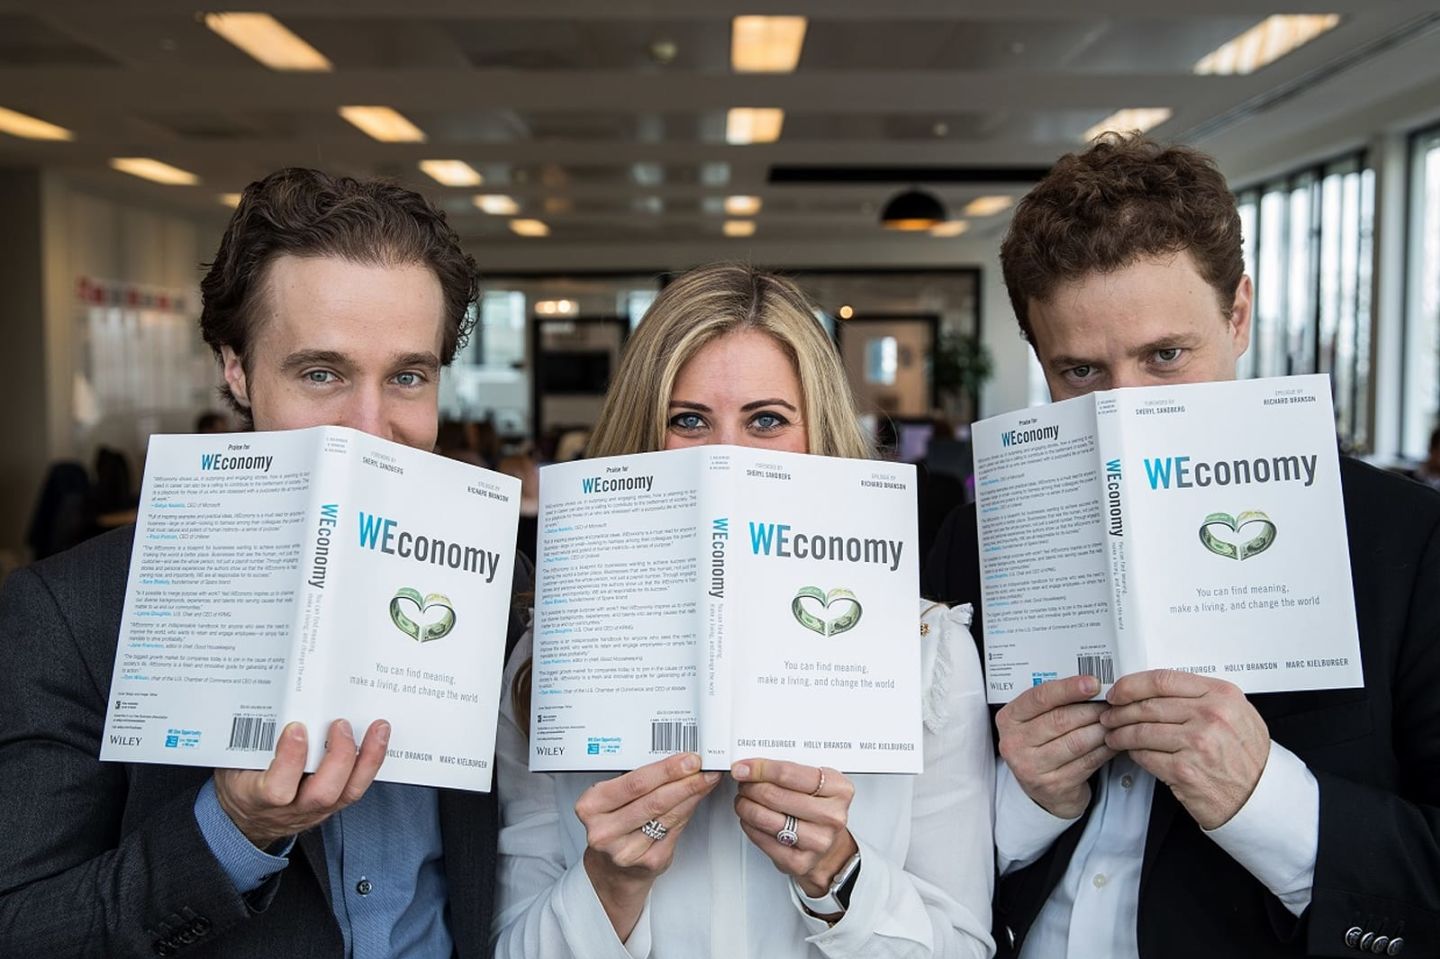 Holly Branson next to two men with the book Weconomy in front of them